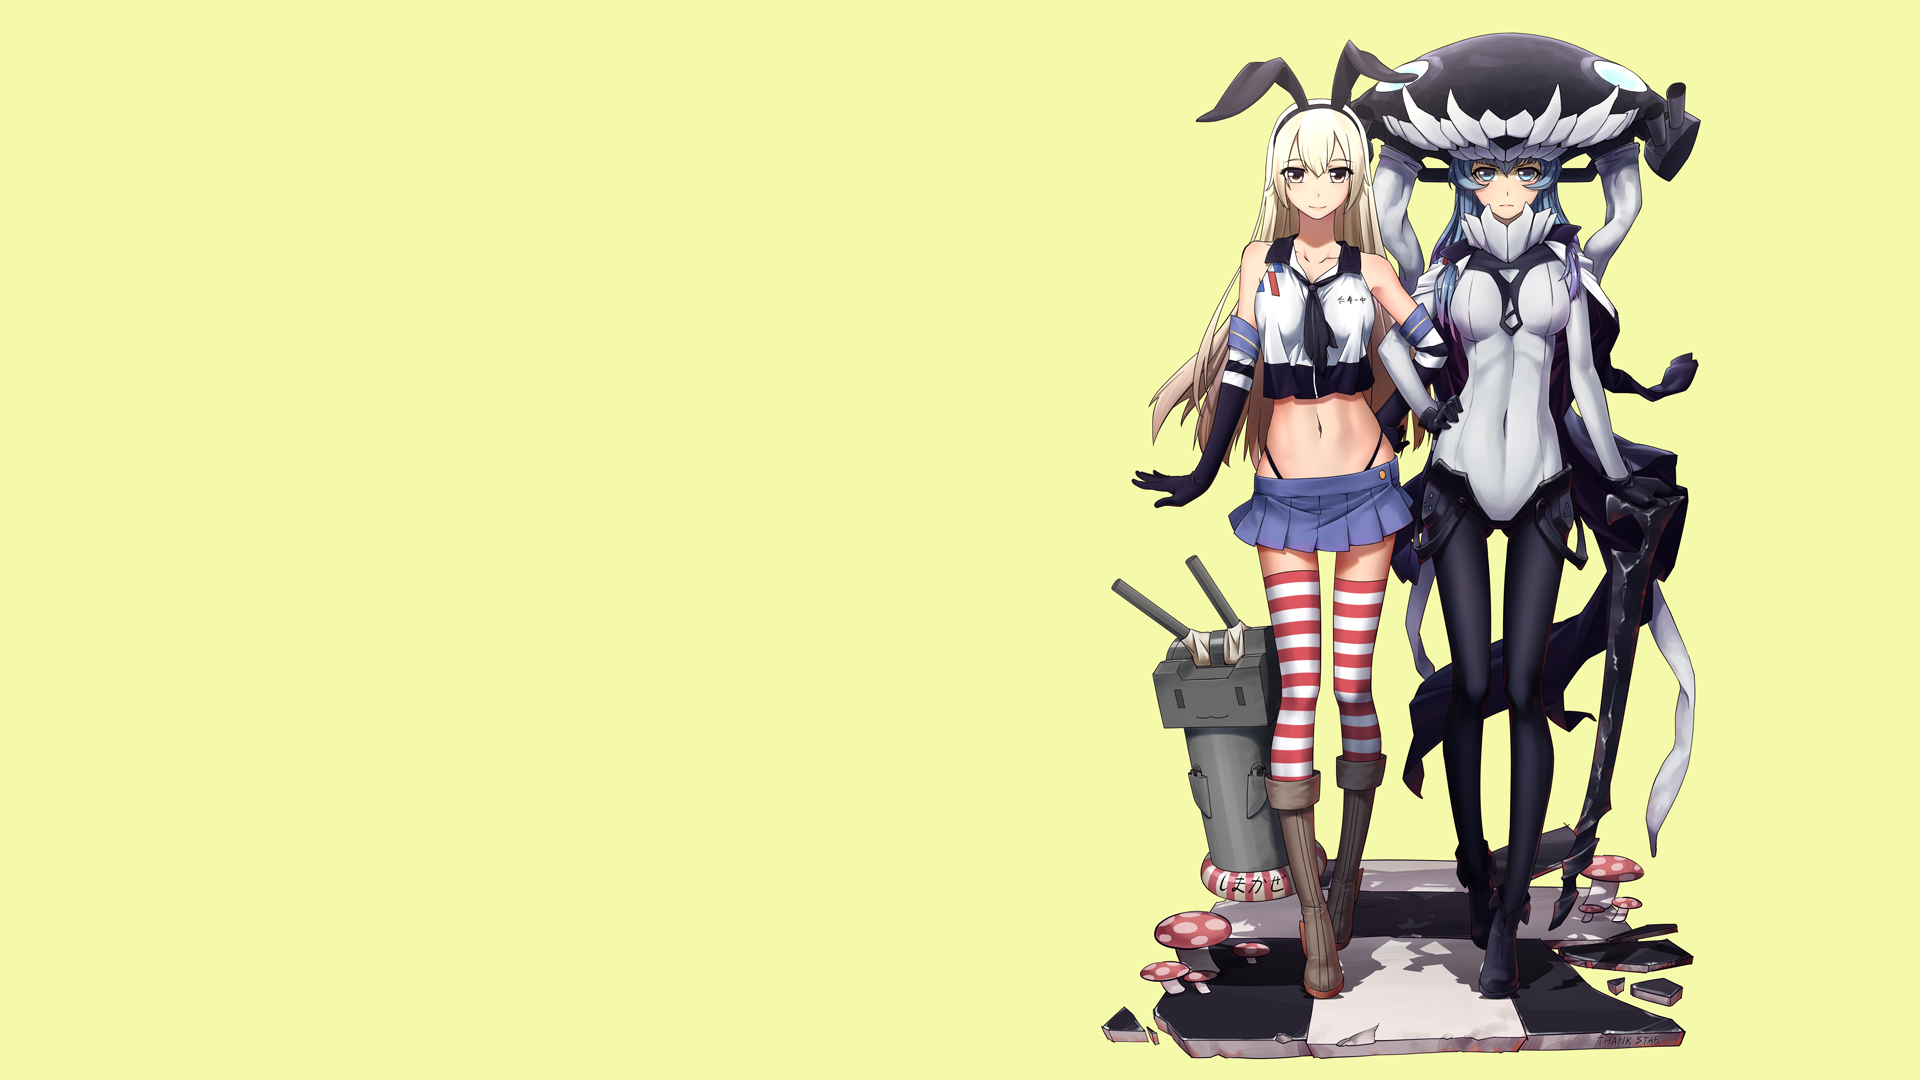 Anime 1920x1080 anime girls stockings Wo-Class Shimakaze (Kancolle) frontal view chess floor simple background striped stockings panties bunny ears miniskirt bodysuit Kantai Collection two women beige background